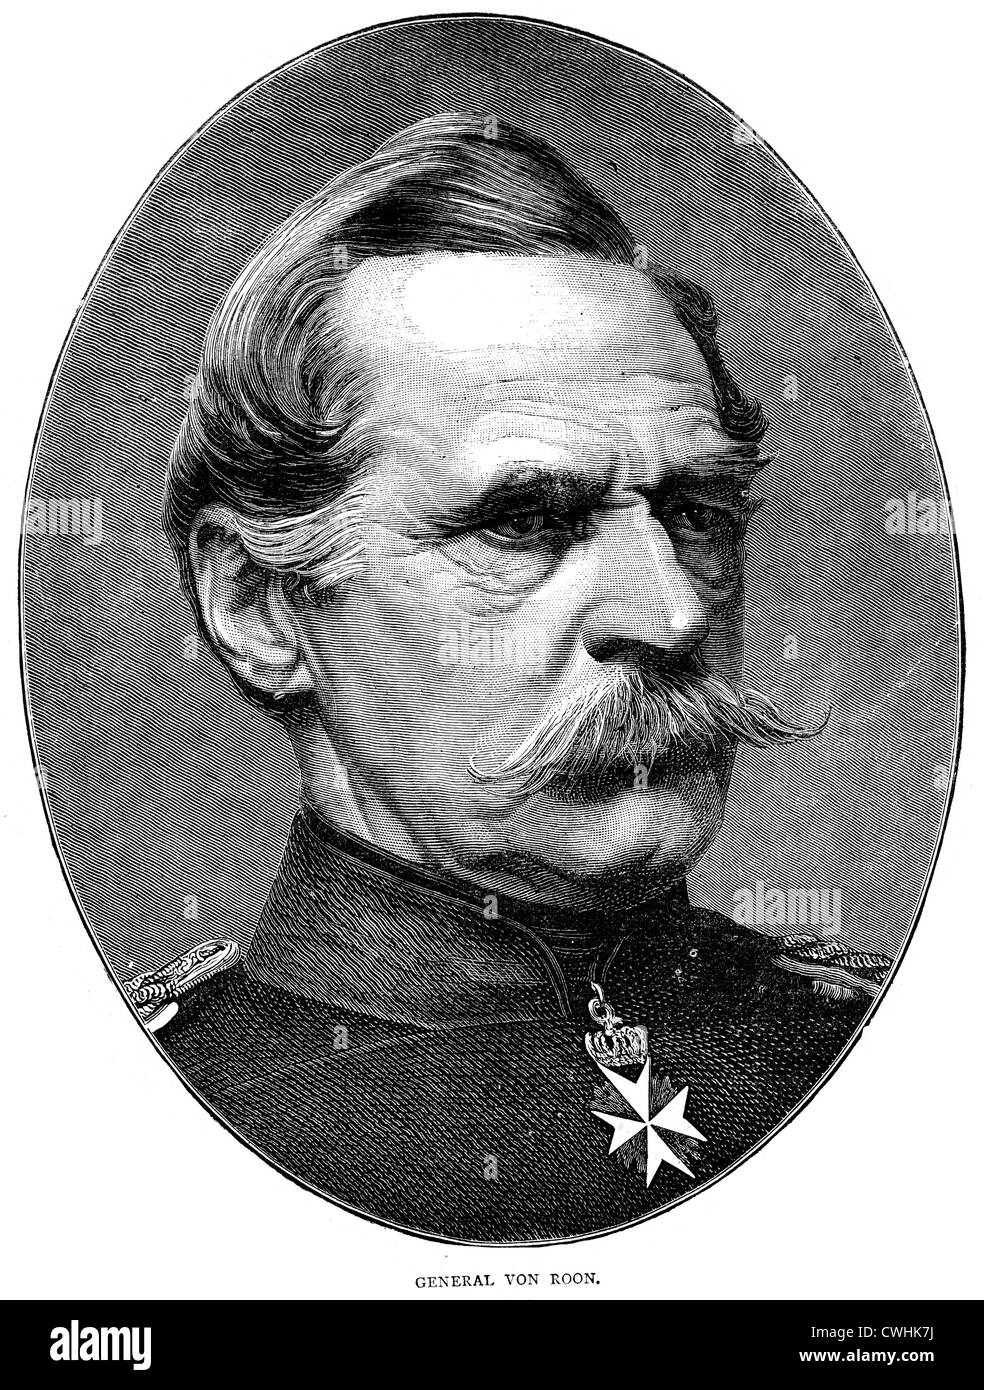 General Albrecht von Roon was a Prussian soldier and statesman. Stock Photo